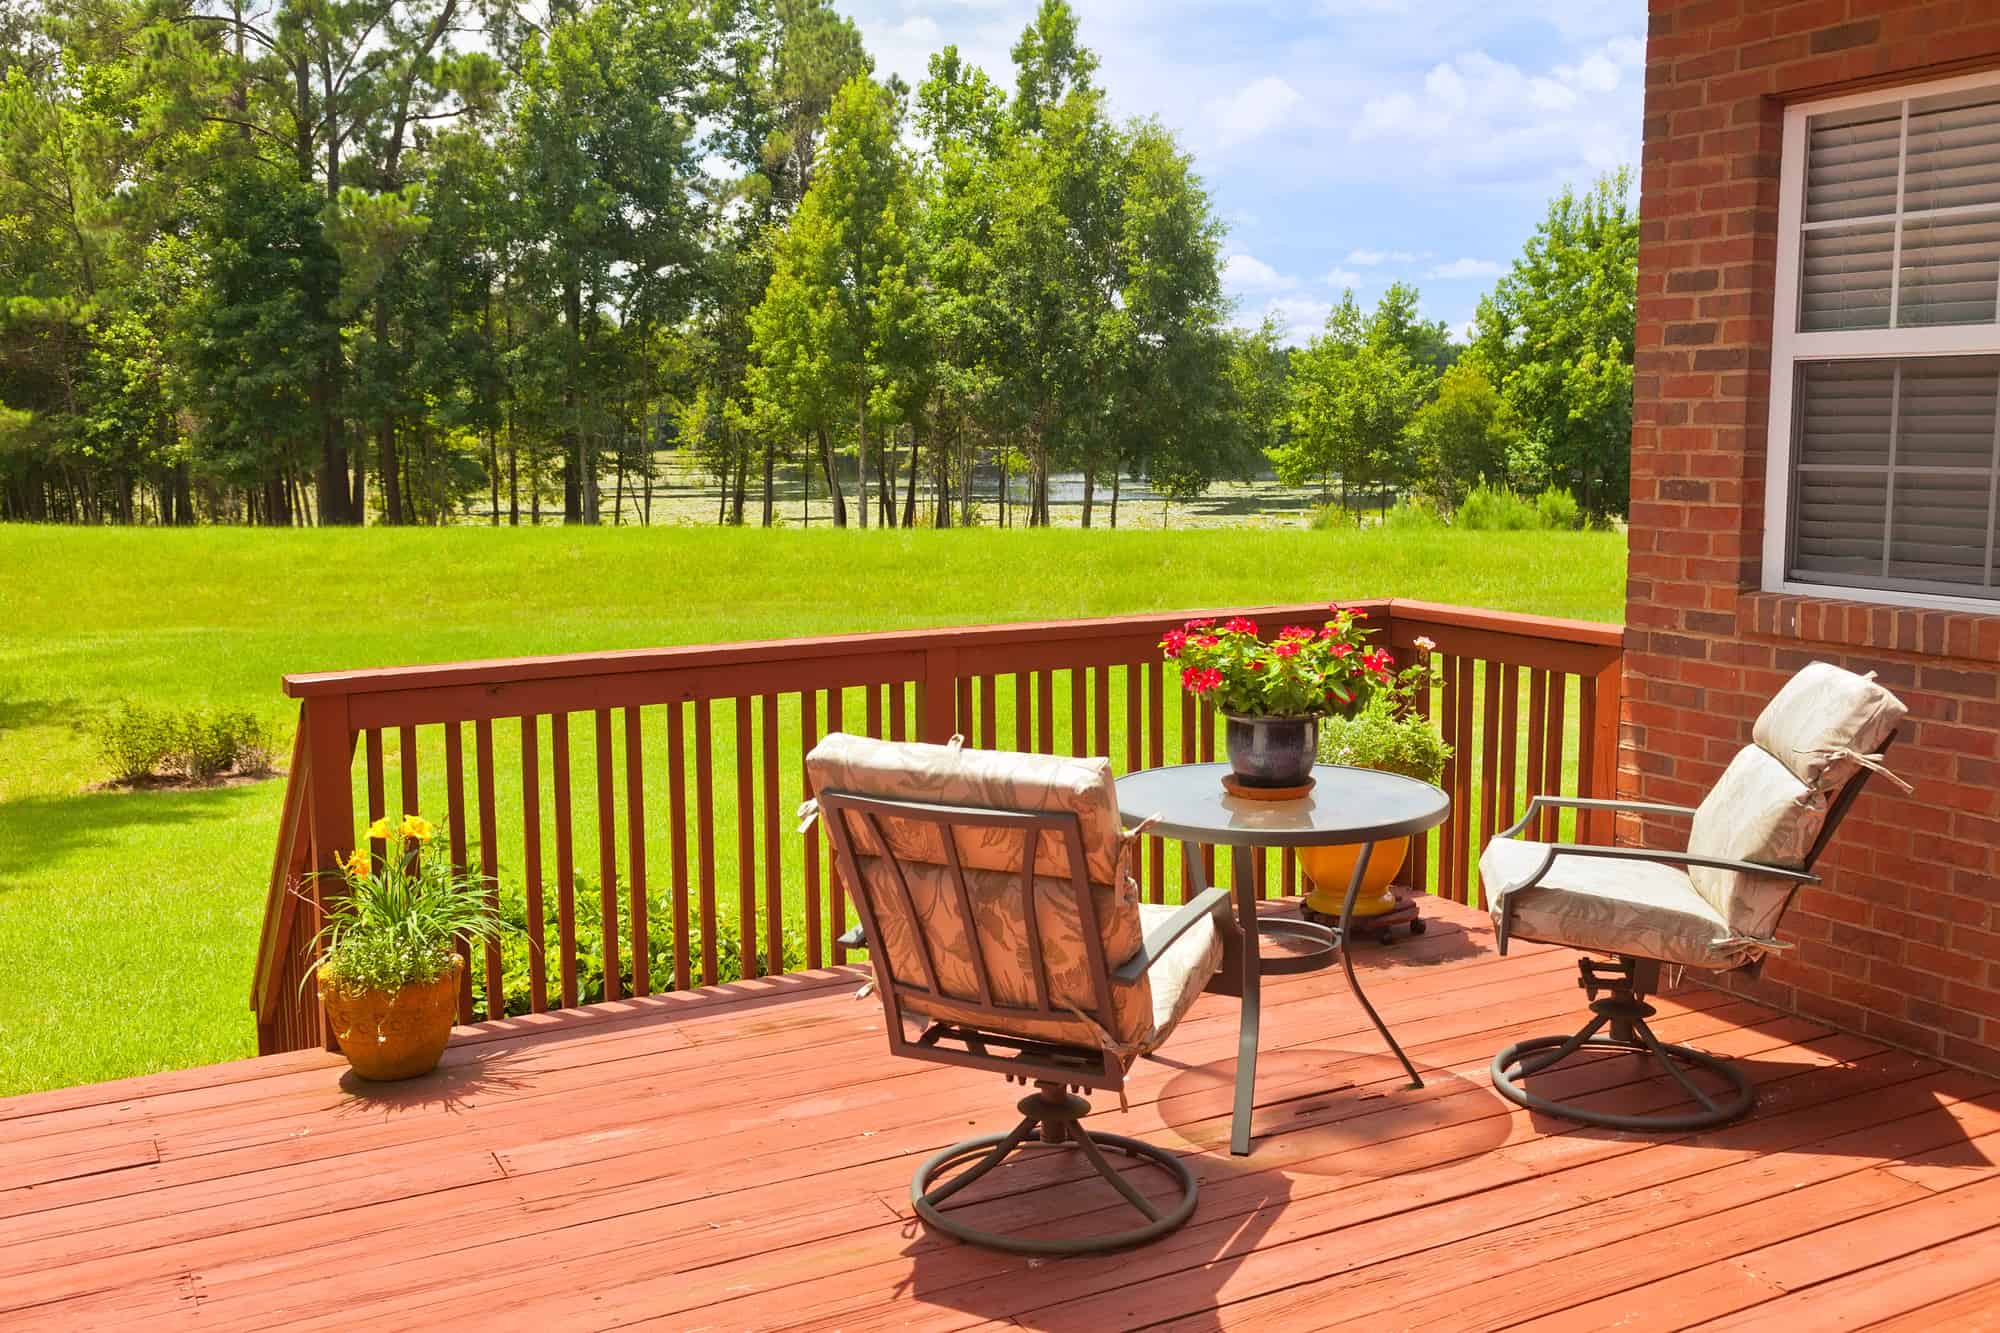 What Is the Best Decking Material? - Decks & Docks Lumber Co.